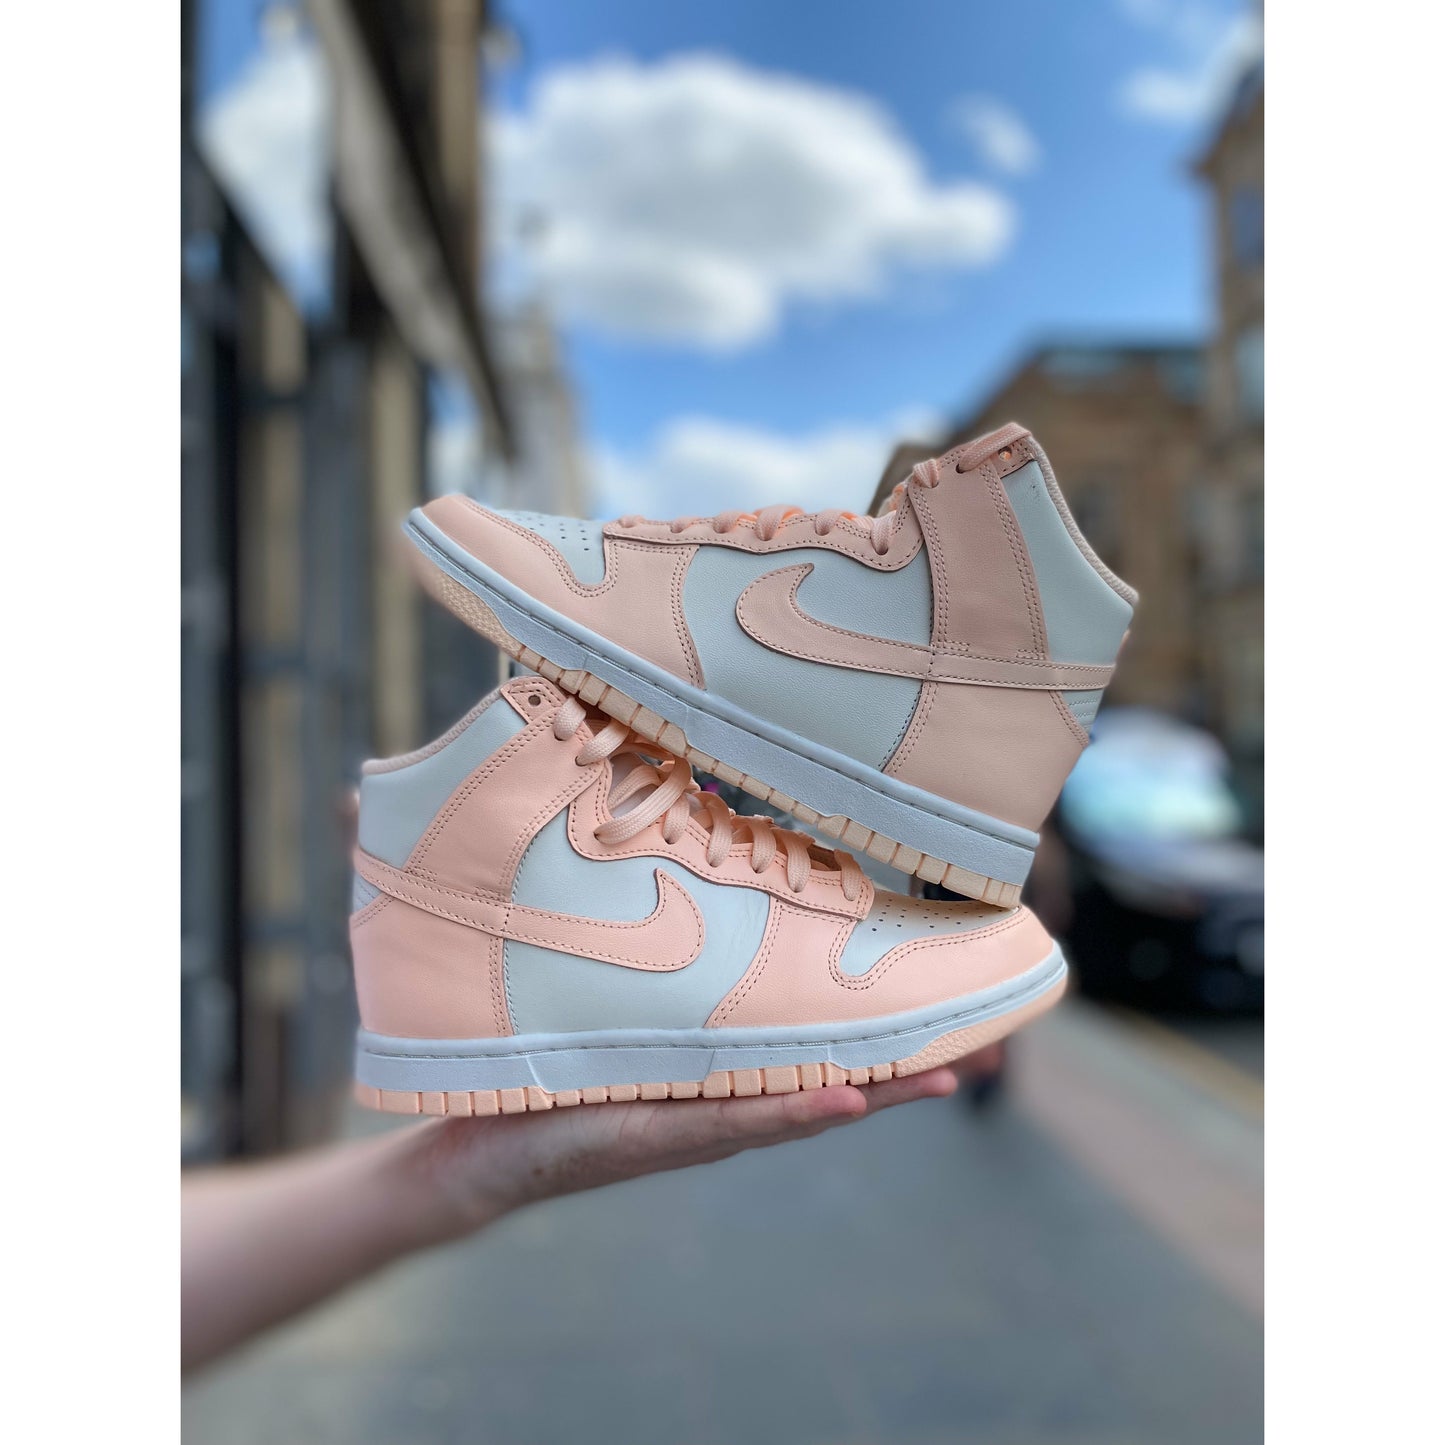 Nike Dunk High Sail Crimson Tint (W) by Nike from £120.00